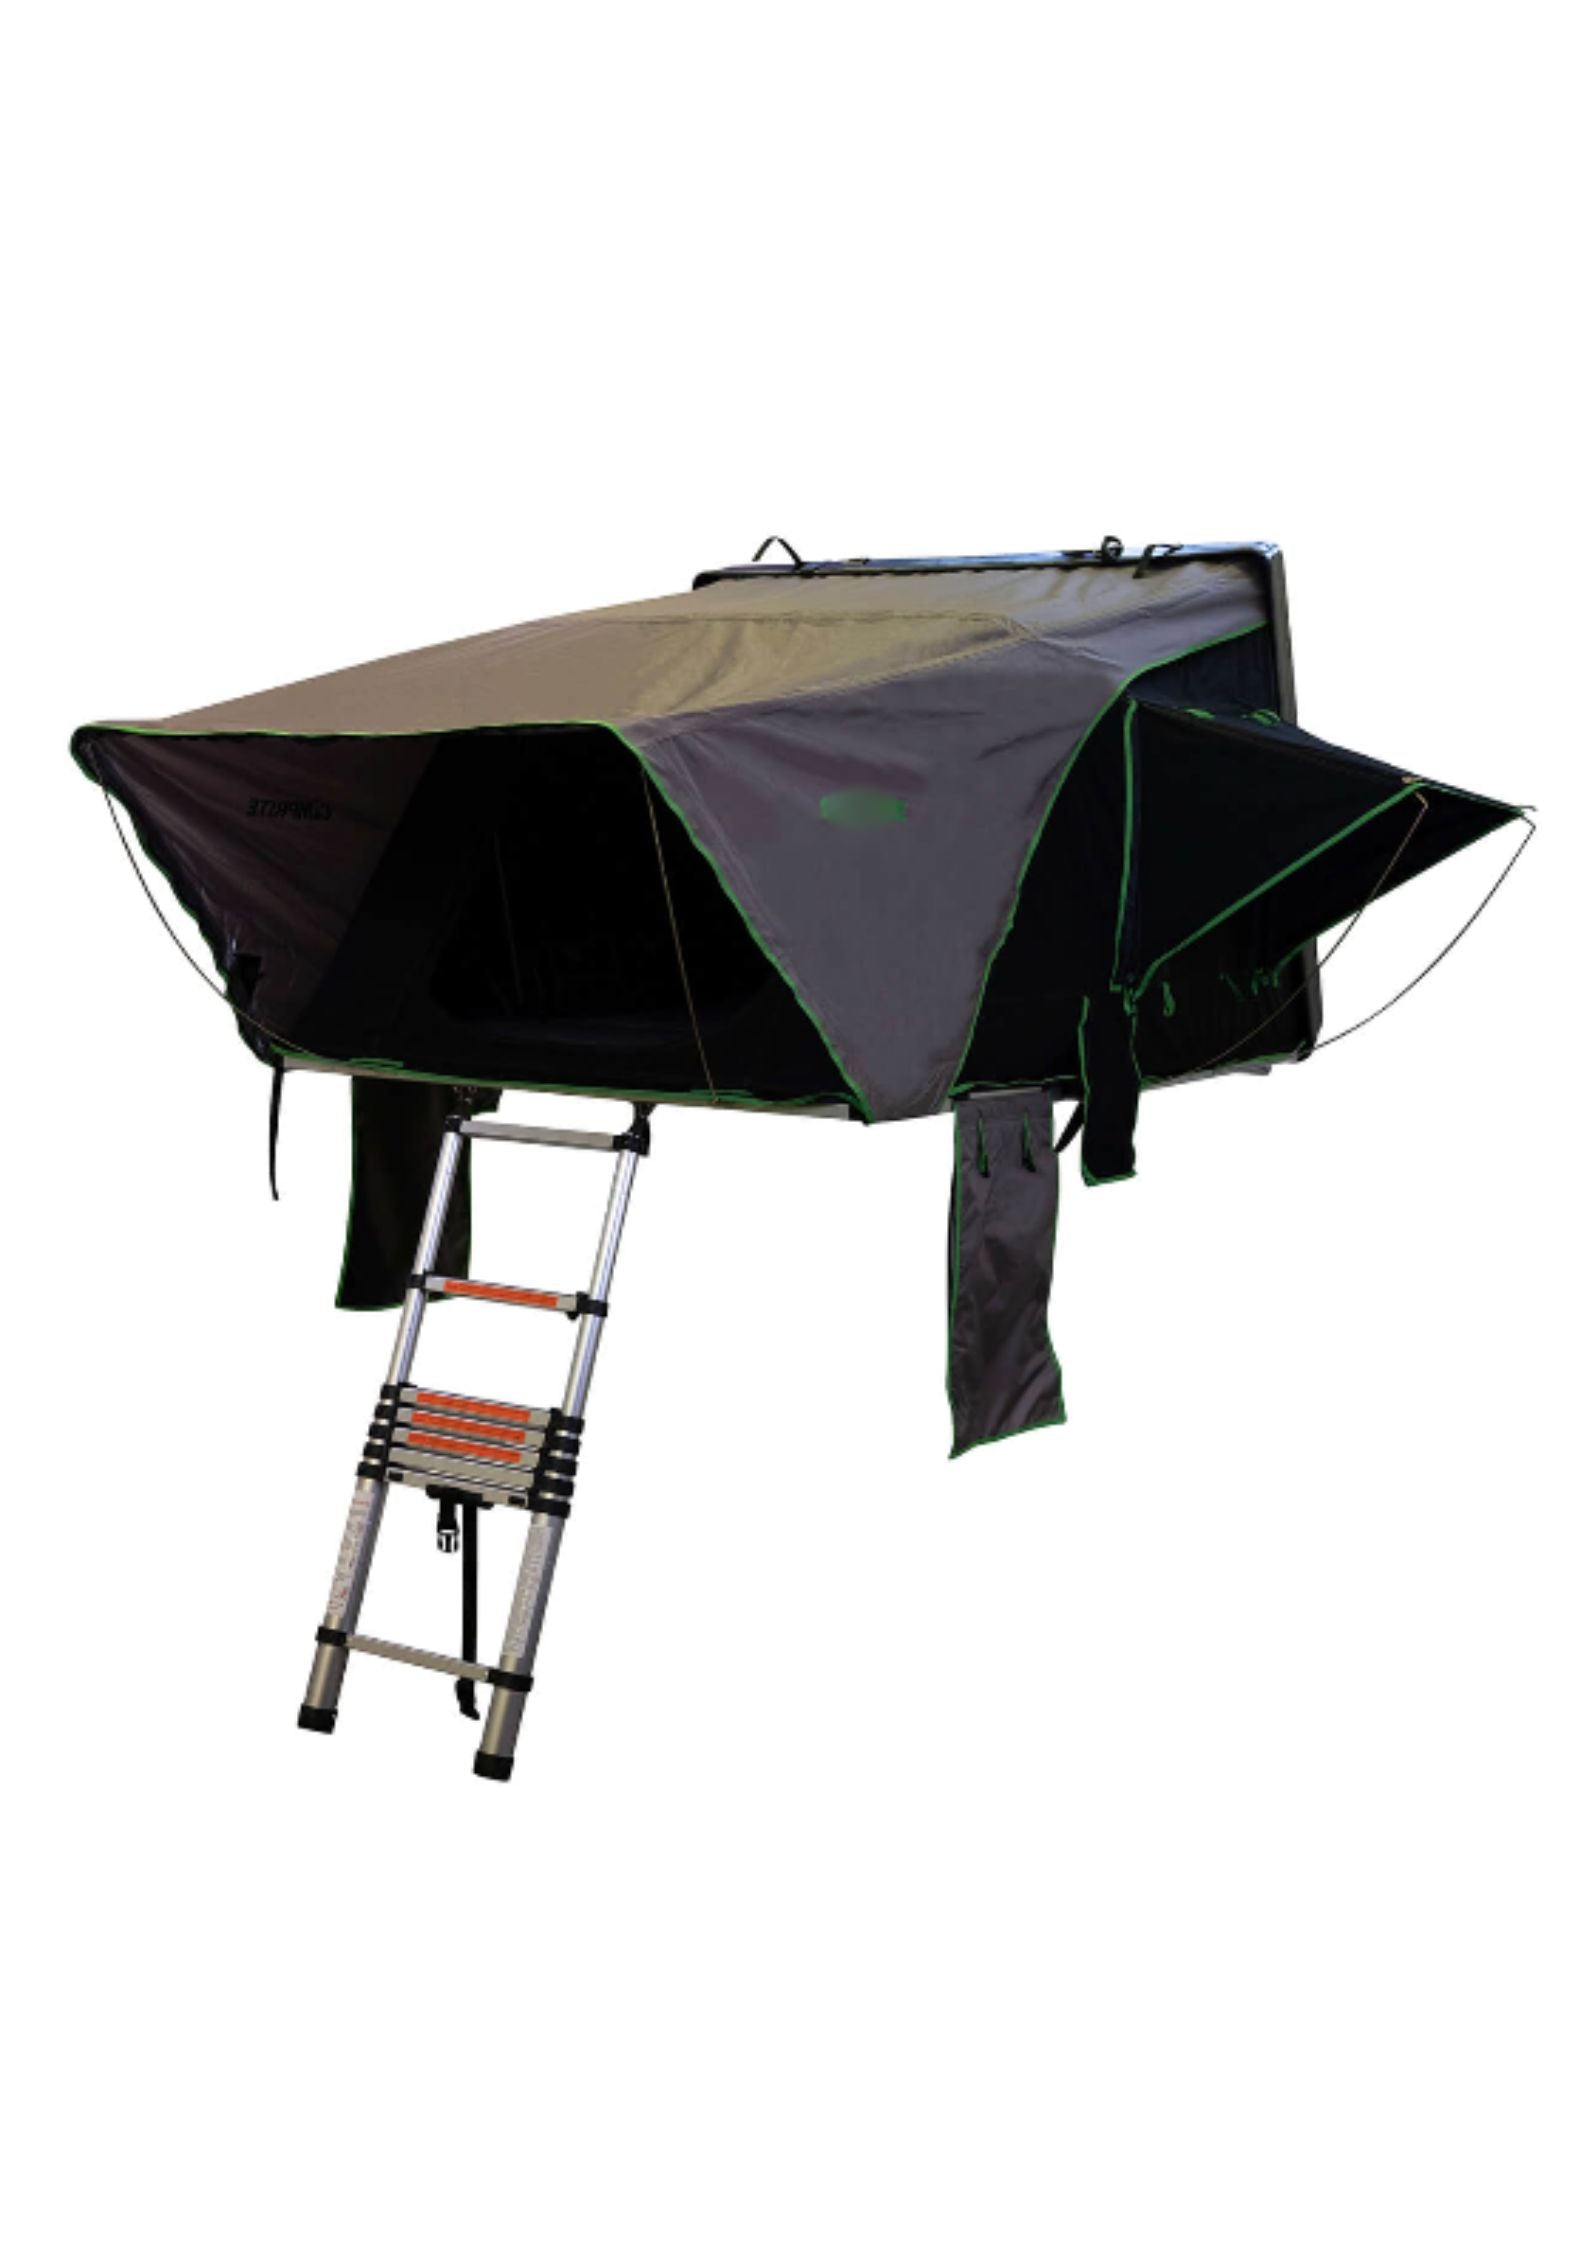 Southern Cross Roof Top Tent Large